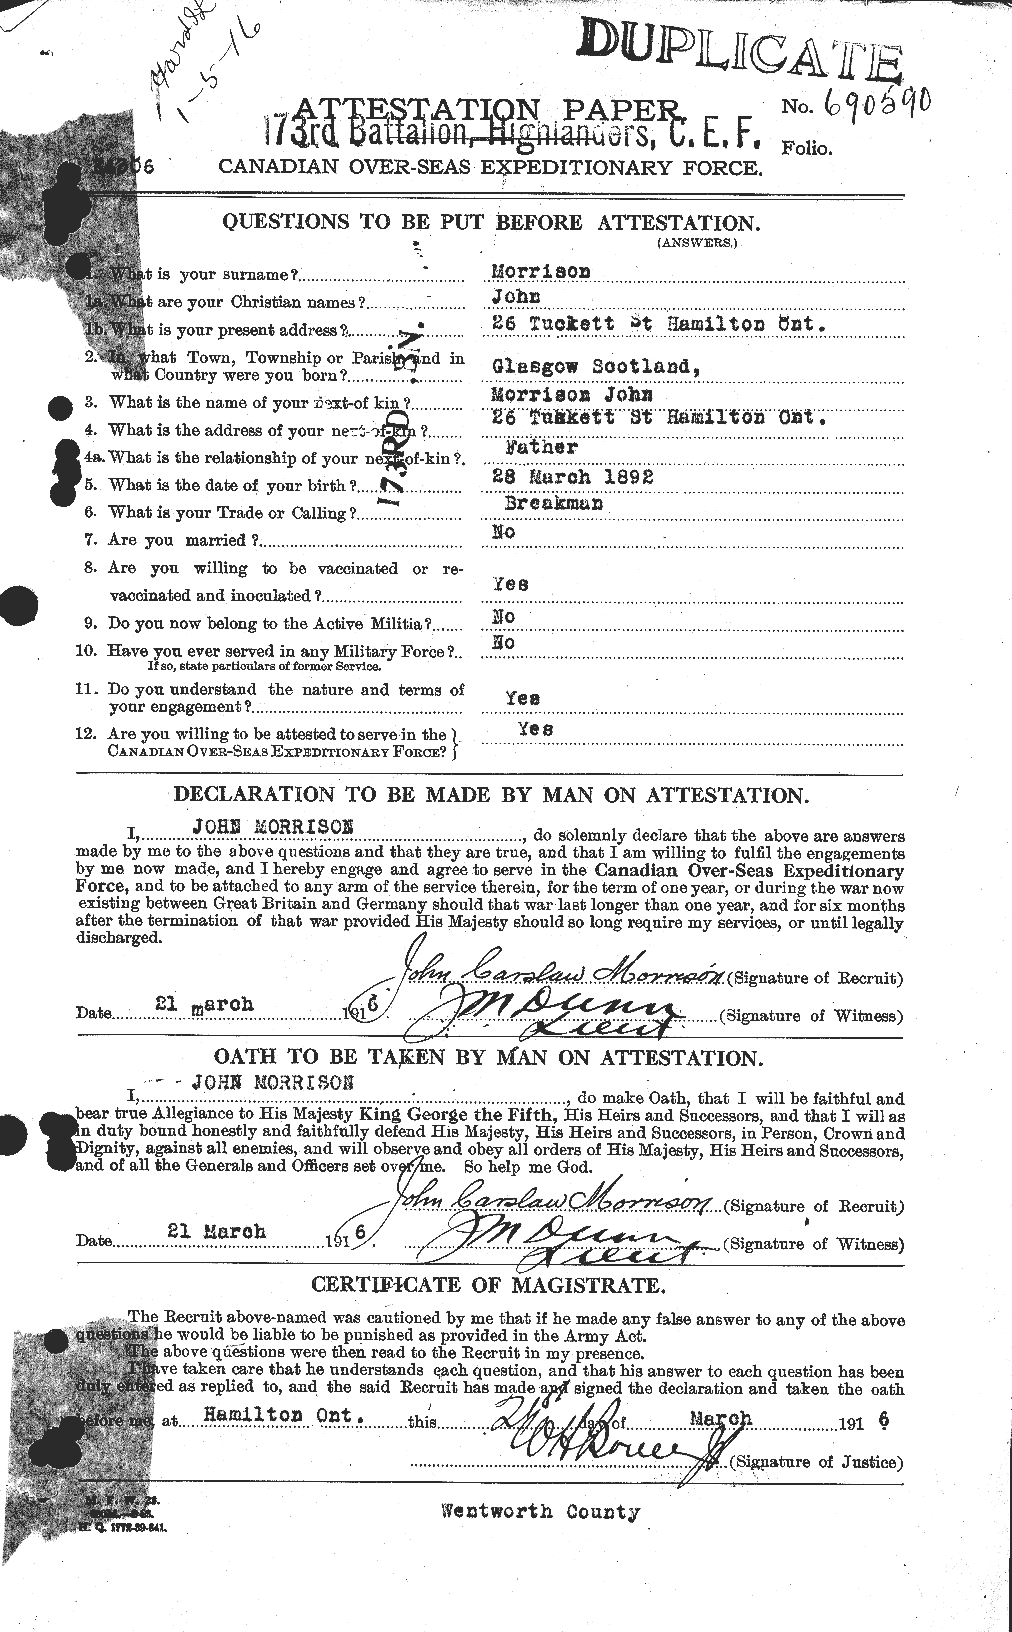 Personnel Records of the First World War - CEF 506966a